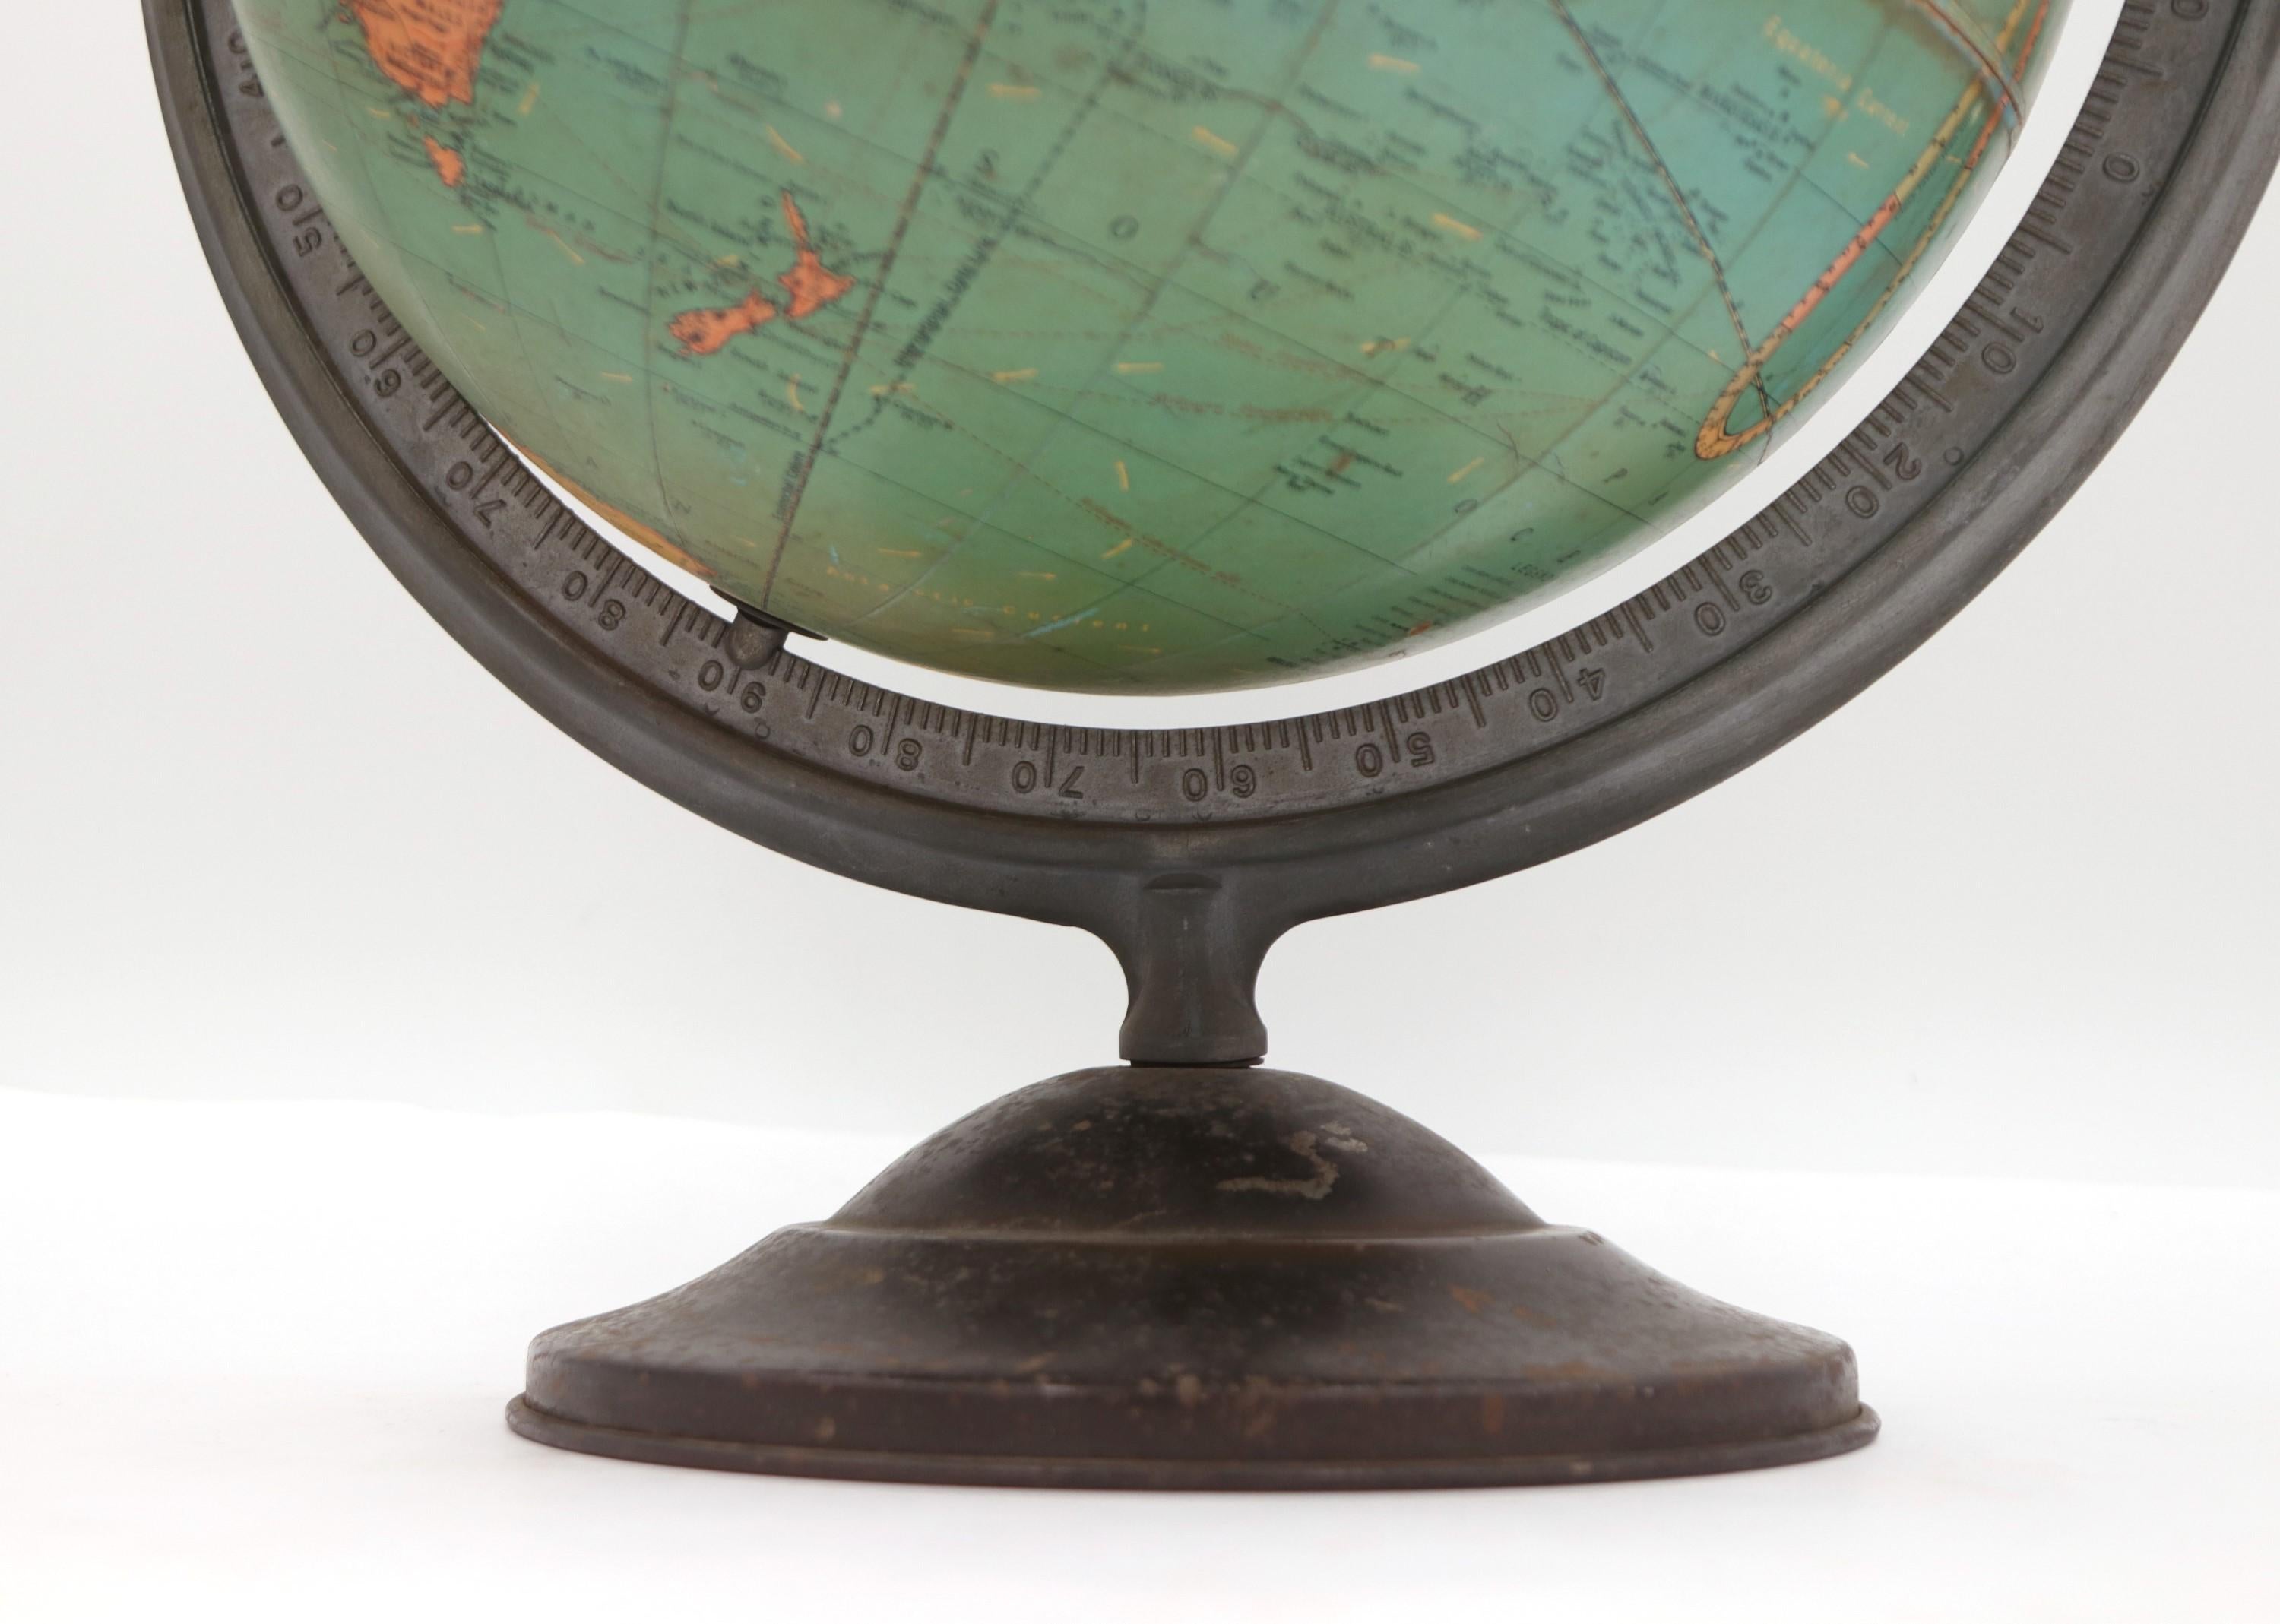 1930s Table Globe Mounted on Base by Replogle Manufacturers 4